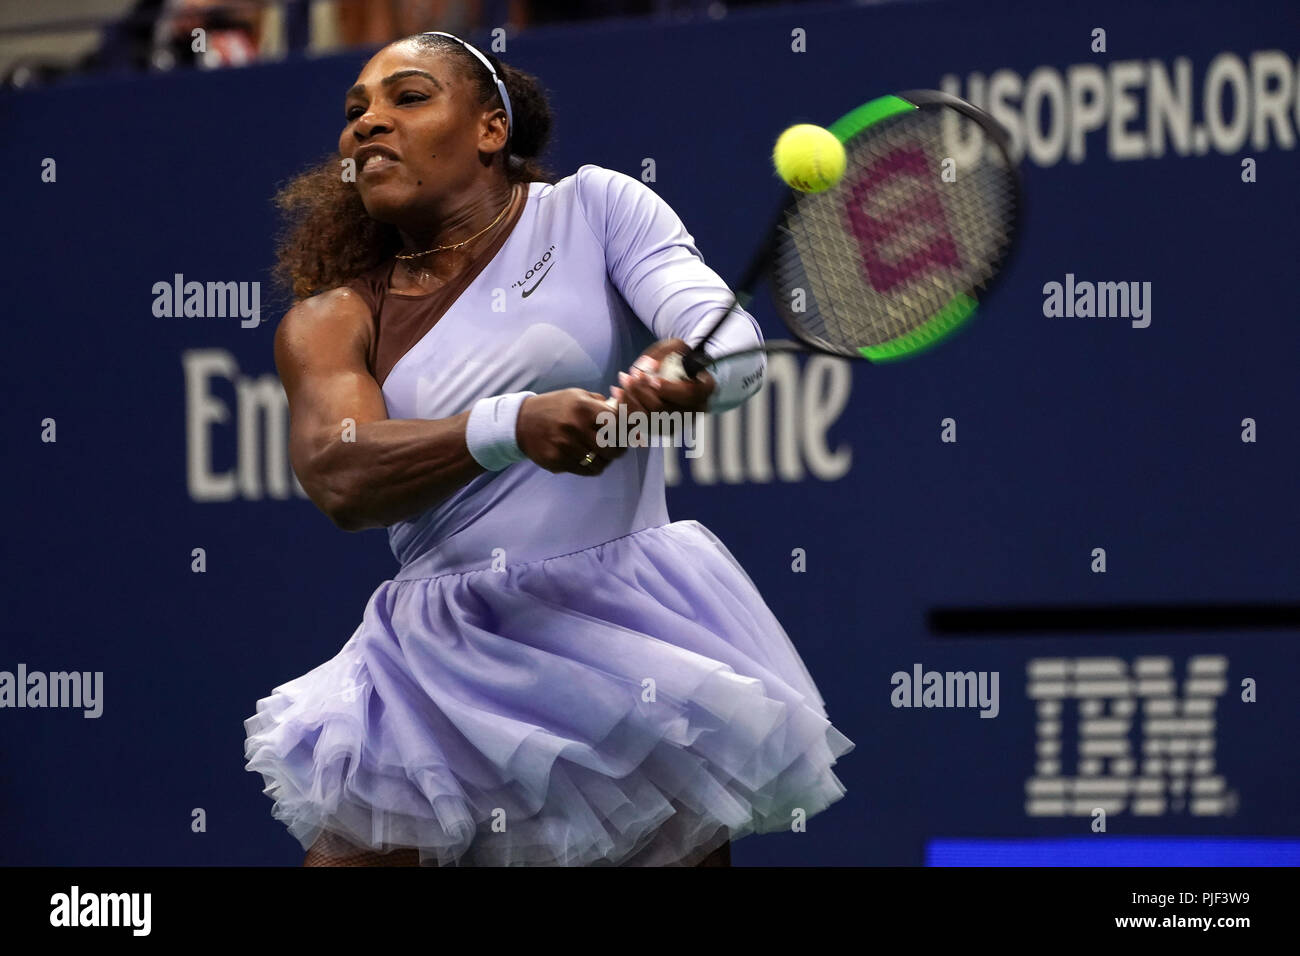 Flushing Meadows, New York - September 6, 2018: US Open Tennis:  Serena Williams of the United States returns a shot to Anastasija Sevastova of Latvia during their semifinal match at the US Open in Flushing Meadows, New York.  Williams won the match in straight sets to advance to Saturday's final where she will face Naomi Osaka of Japan. Credit: Adam Stoltman/Alamy Live News Stock Photo